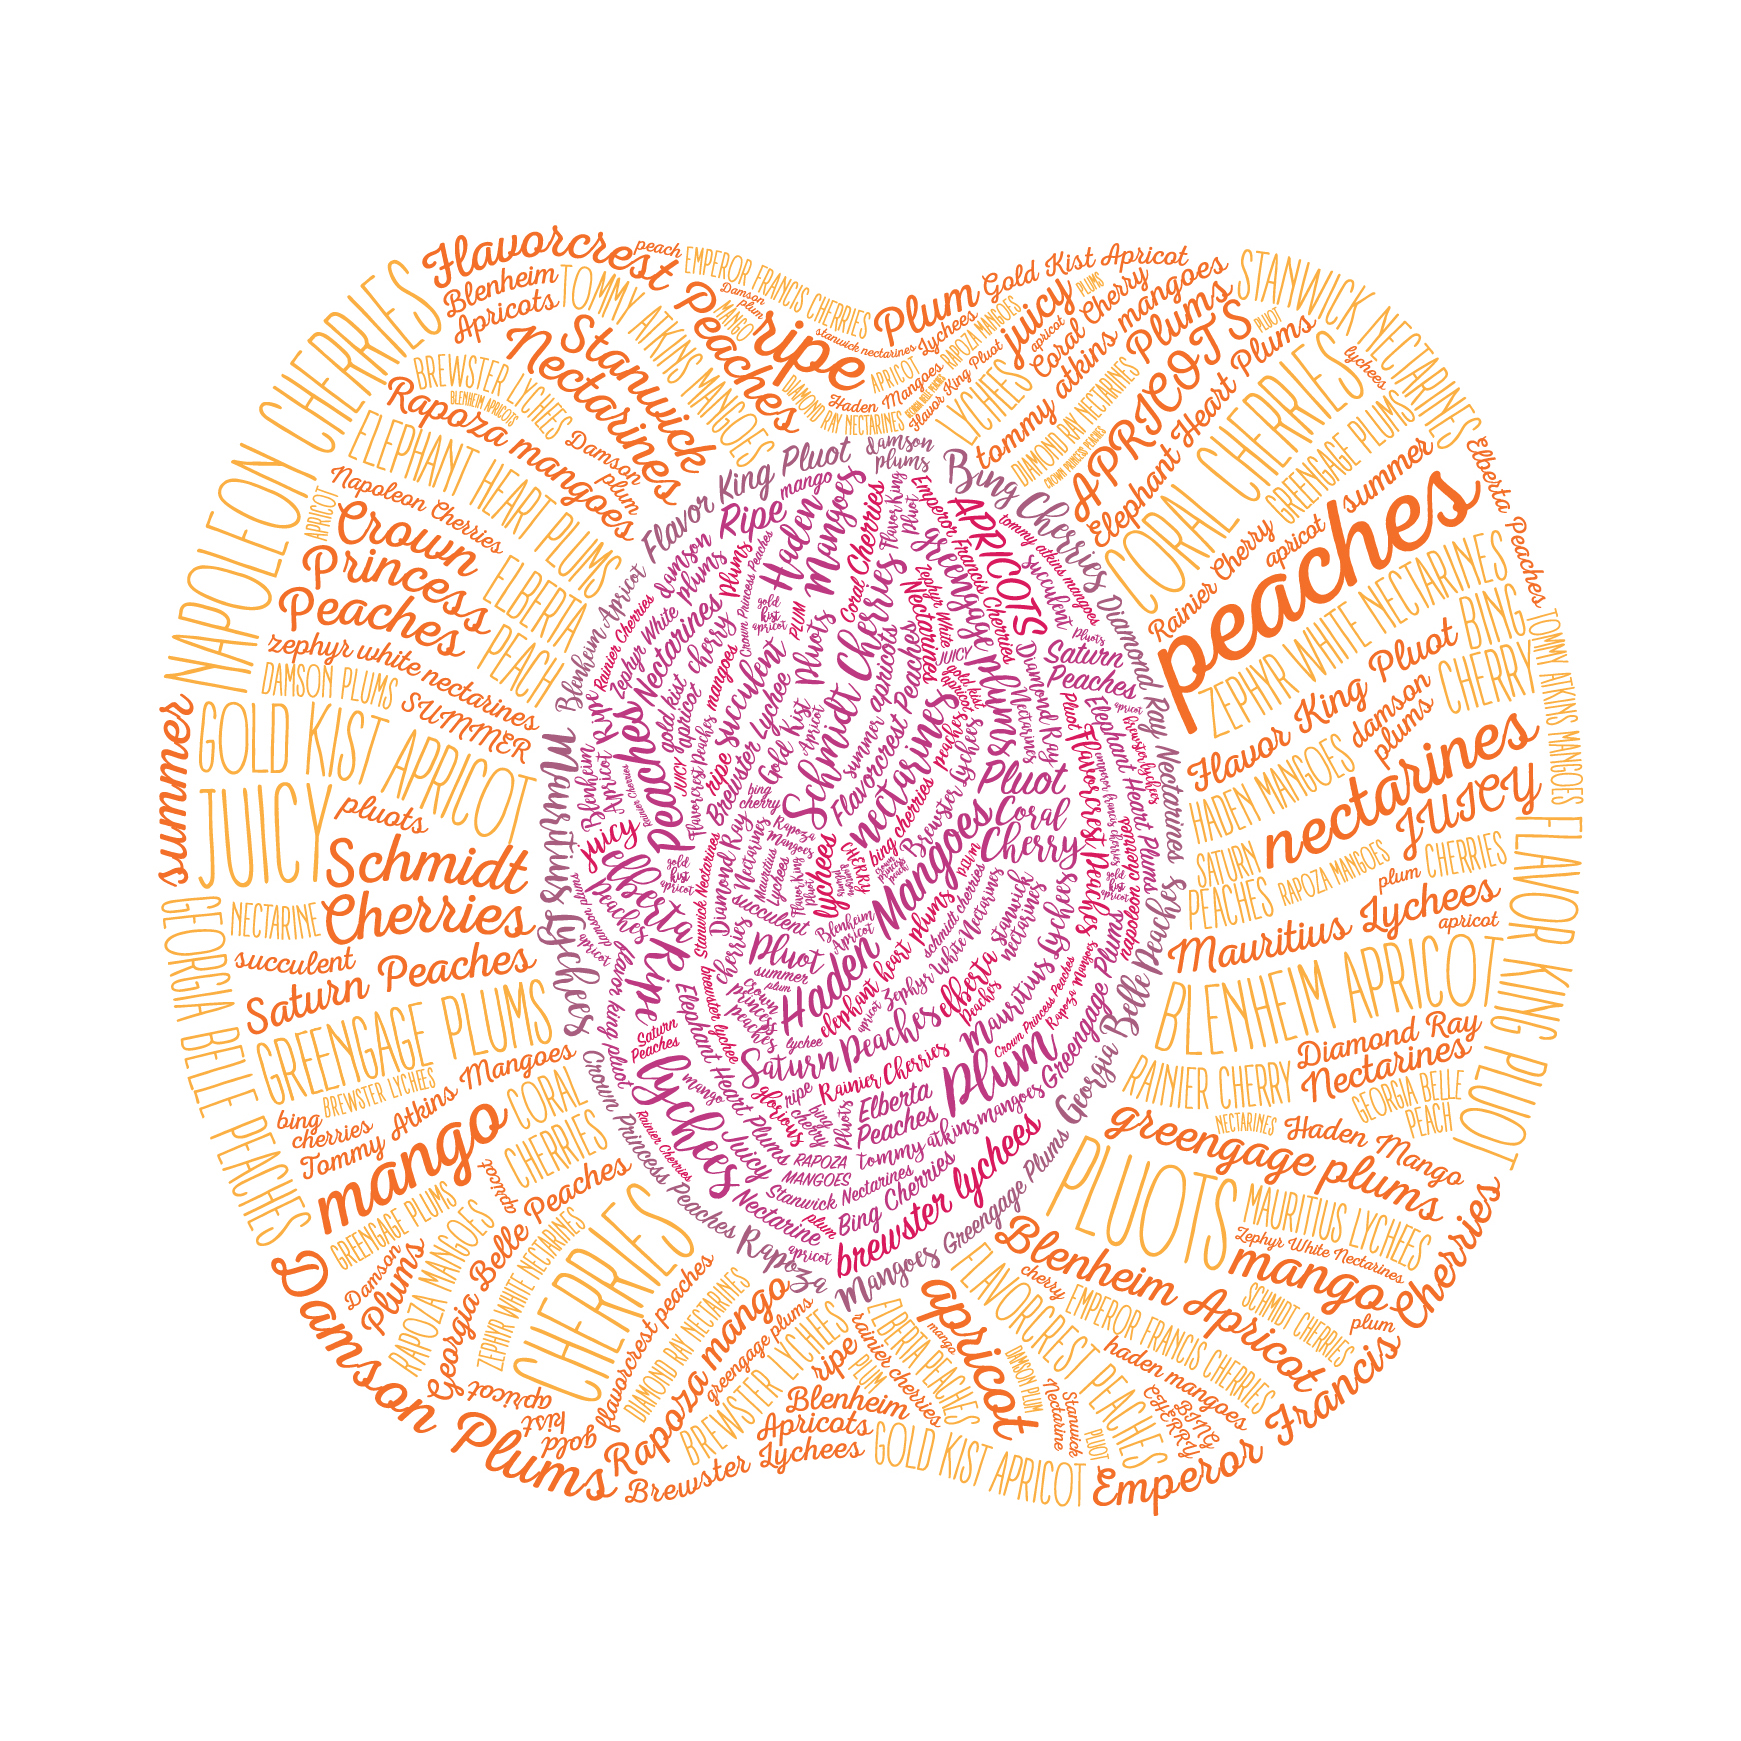  Custom word cloud in the shape of a peach celebrating the many varieties of stone fruit 